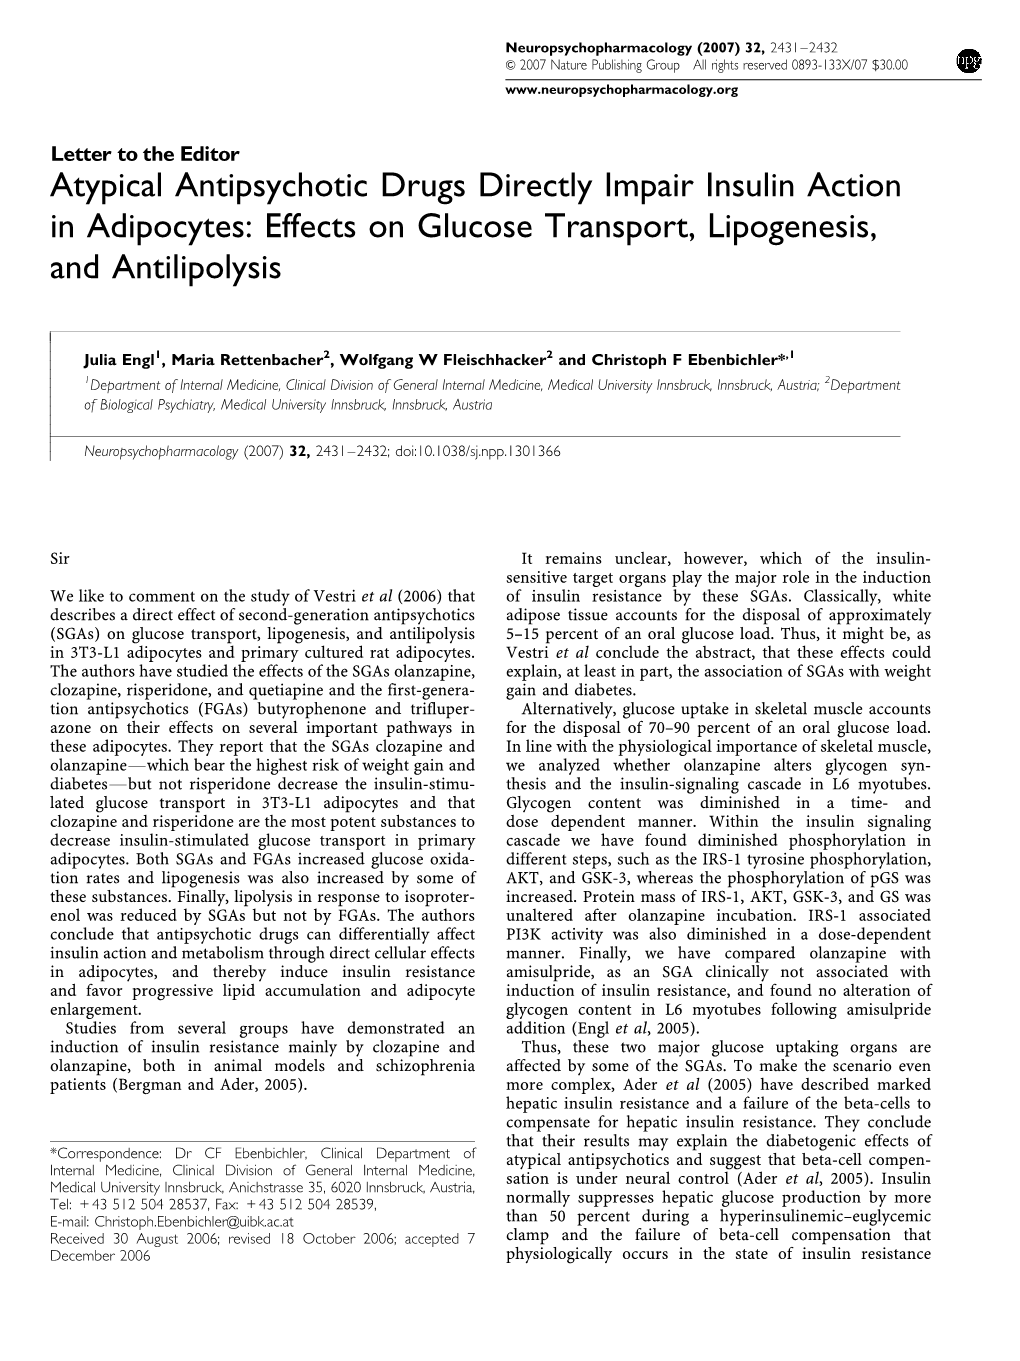 Atypical Antipsychotic Drugs Directly Impair Insulin Action in Adipocytes: Effects on Glucose Transport, Lipogenesis, and Antilipolysis